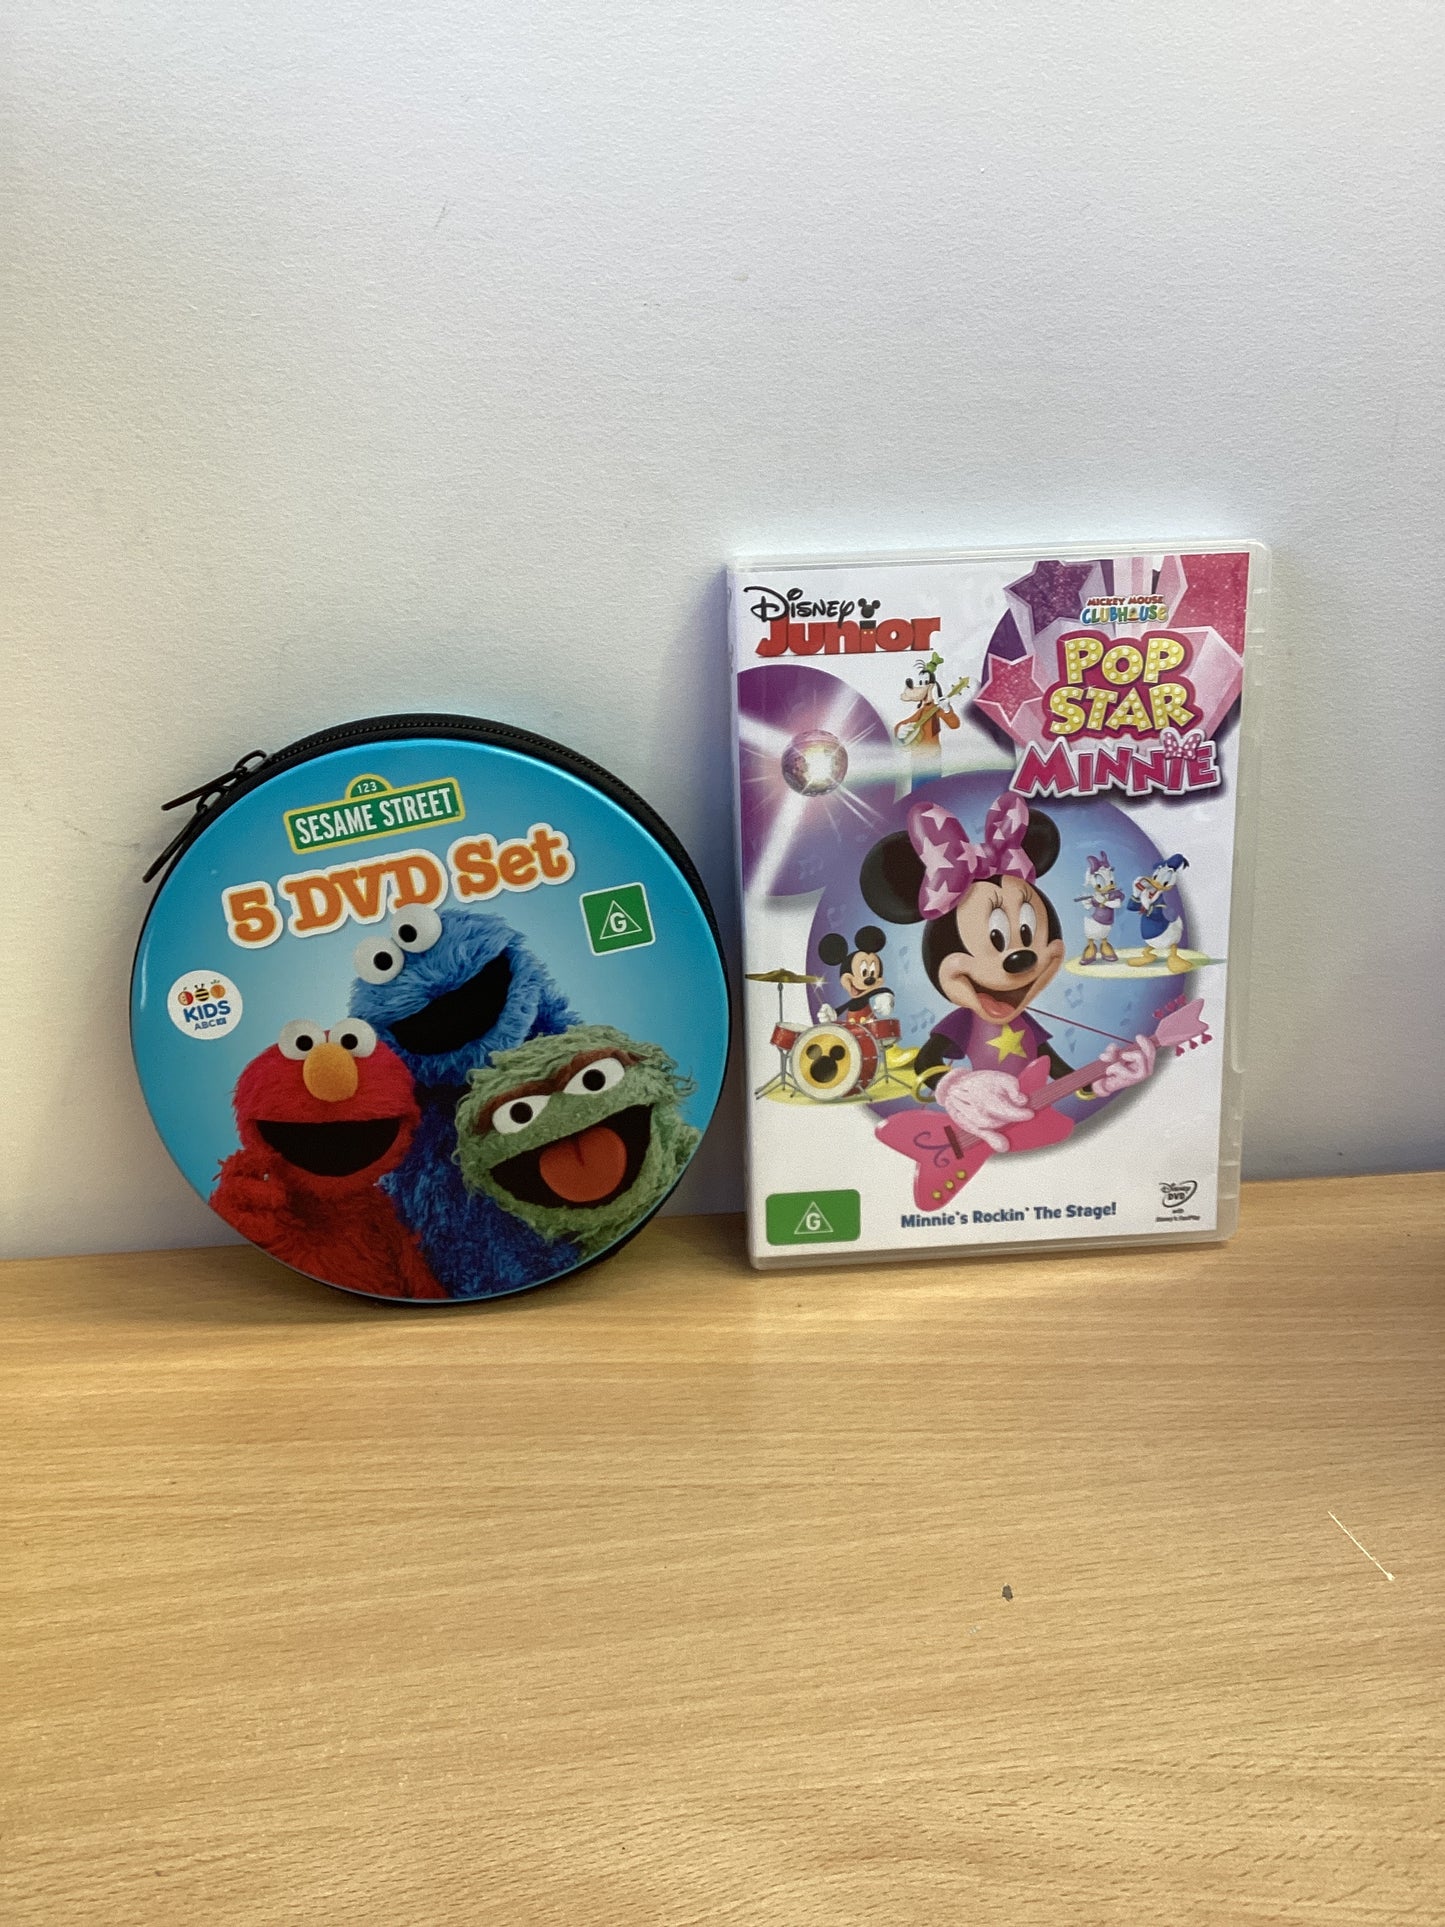 Sesame Street and Minnie Mouse pop star dvds